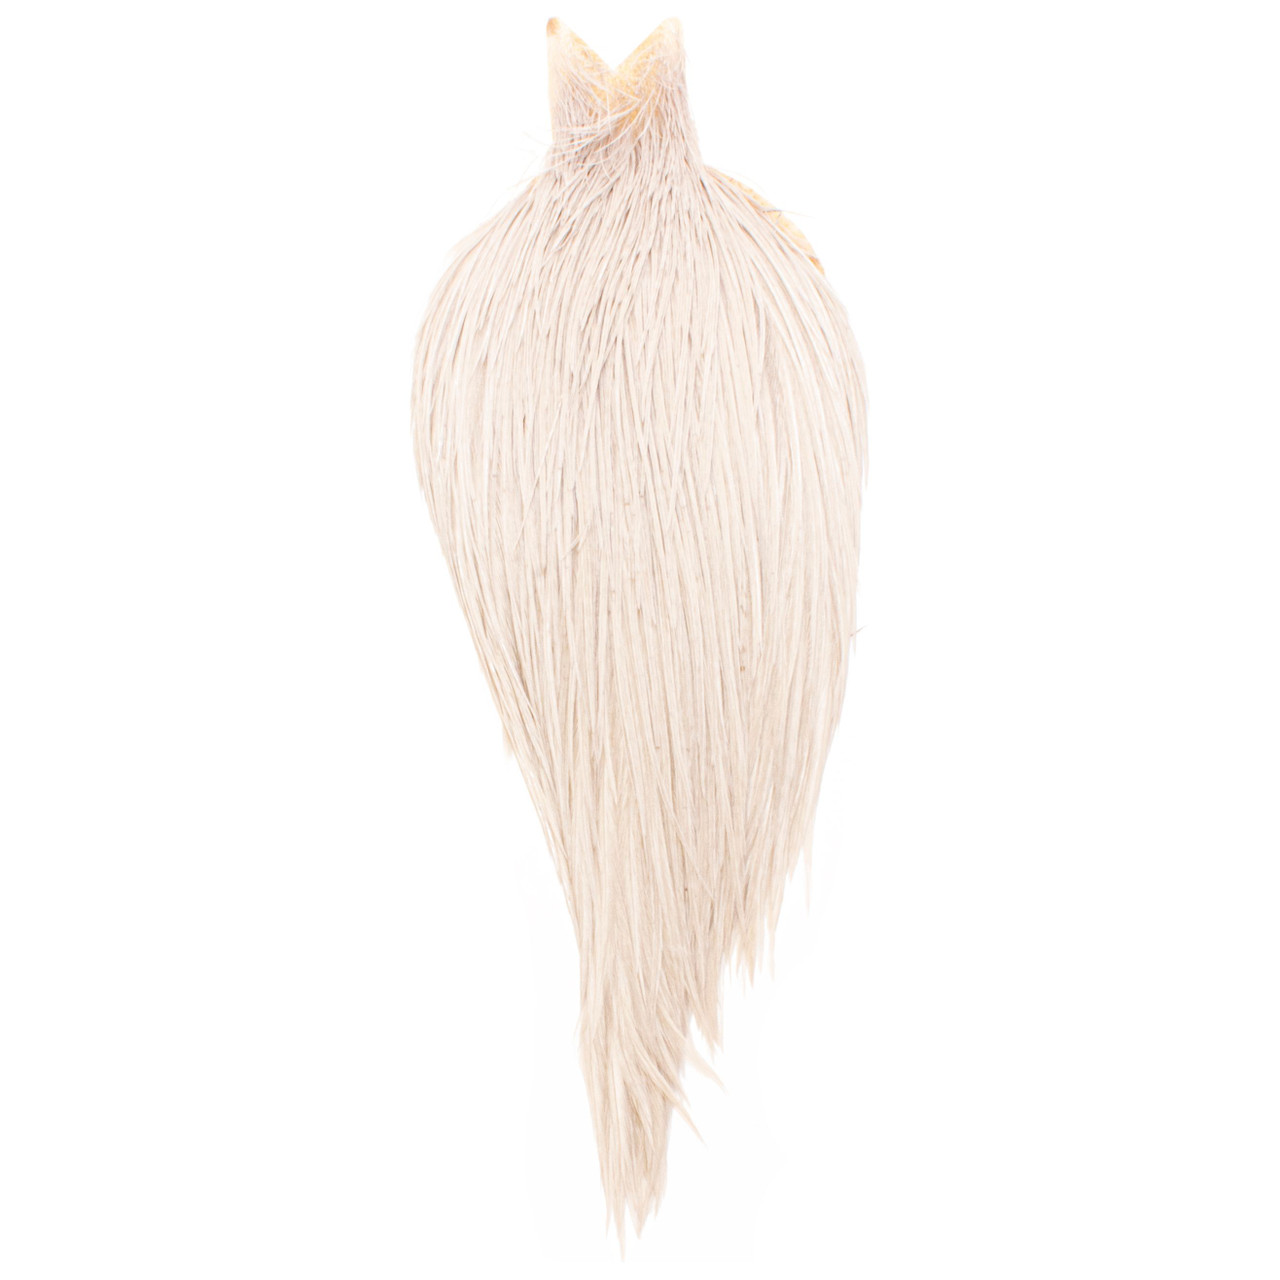 https://cdn11.bigcommerce.com/s-2vv8l4co0l/images/stencil/1280x1280/products/4130/10941/107738-whiting-farms-high-dry-hackle-cape-light-dun-01__43456.1596986893.jpg?c=2